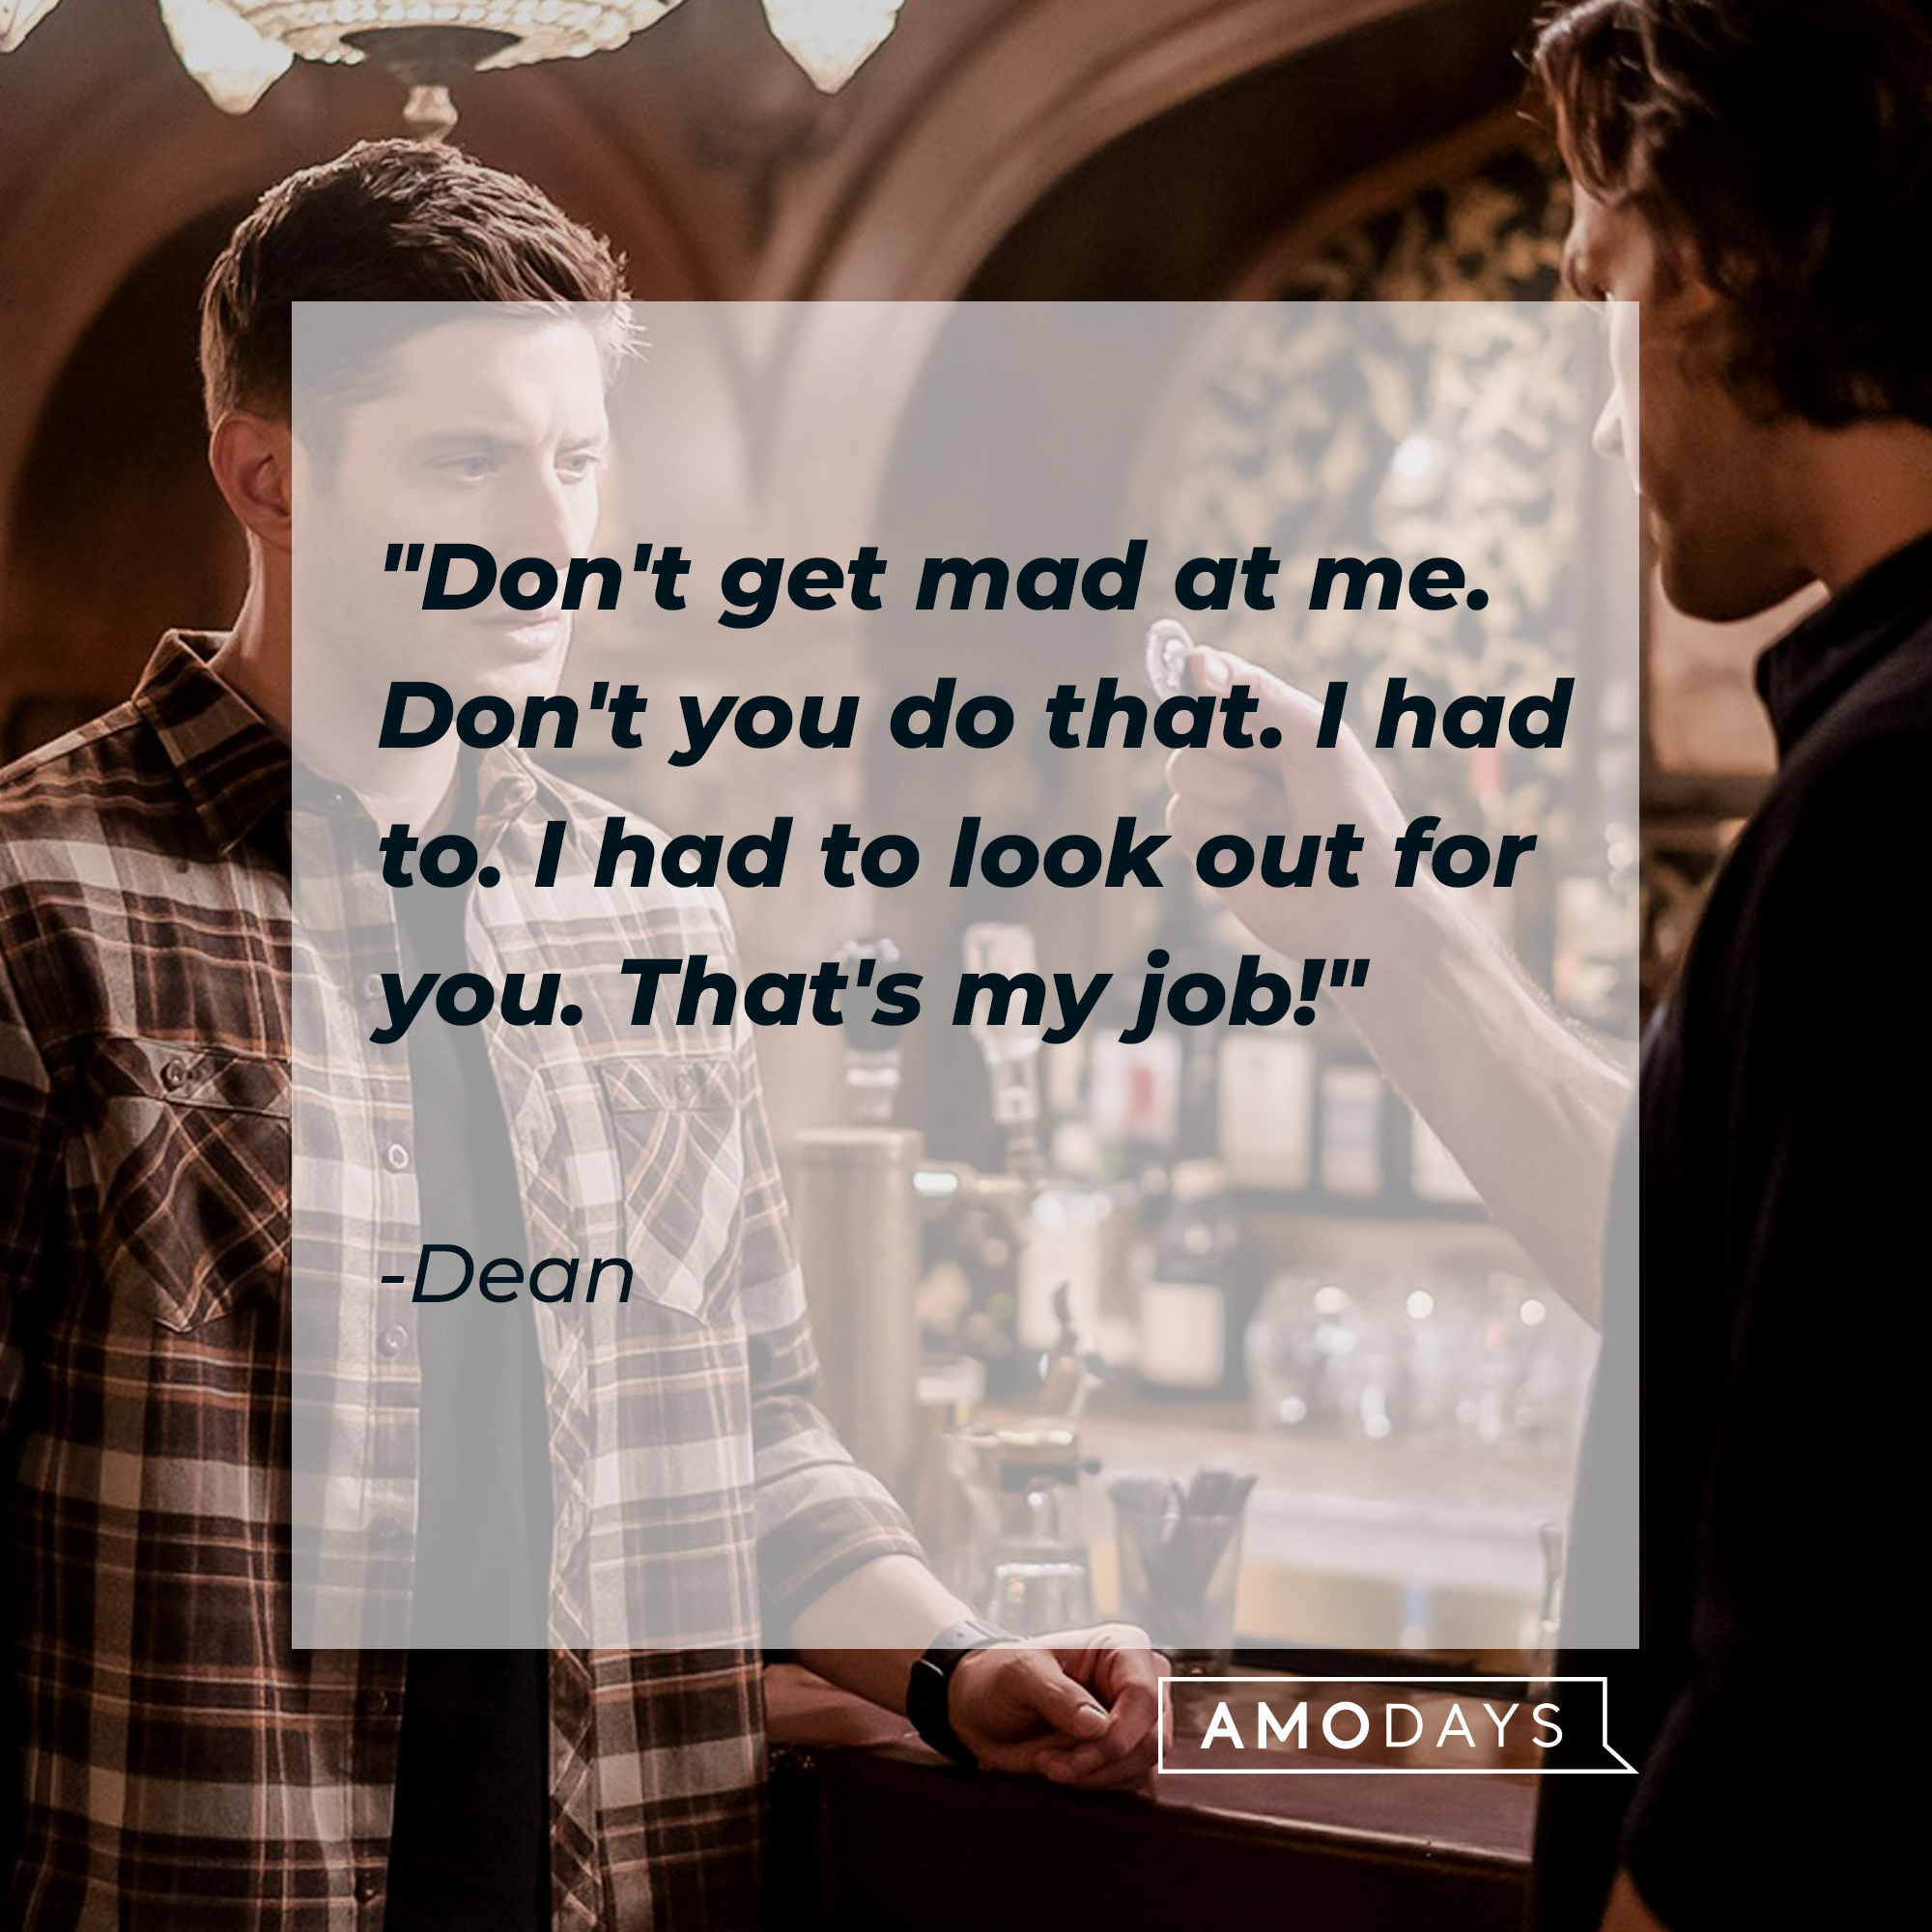 A photo of Dean and Sam Winchester with Dean's quote, "Don't get mad at me. Don't you do that. I had to. I had to look out for you. That's my job!" | Source: Facebook/Supernatural